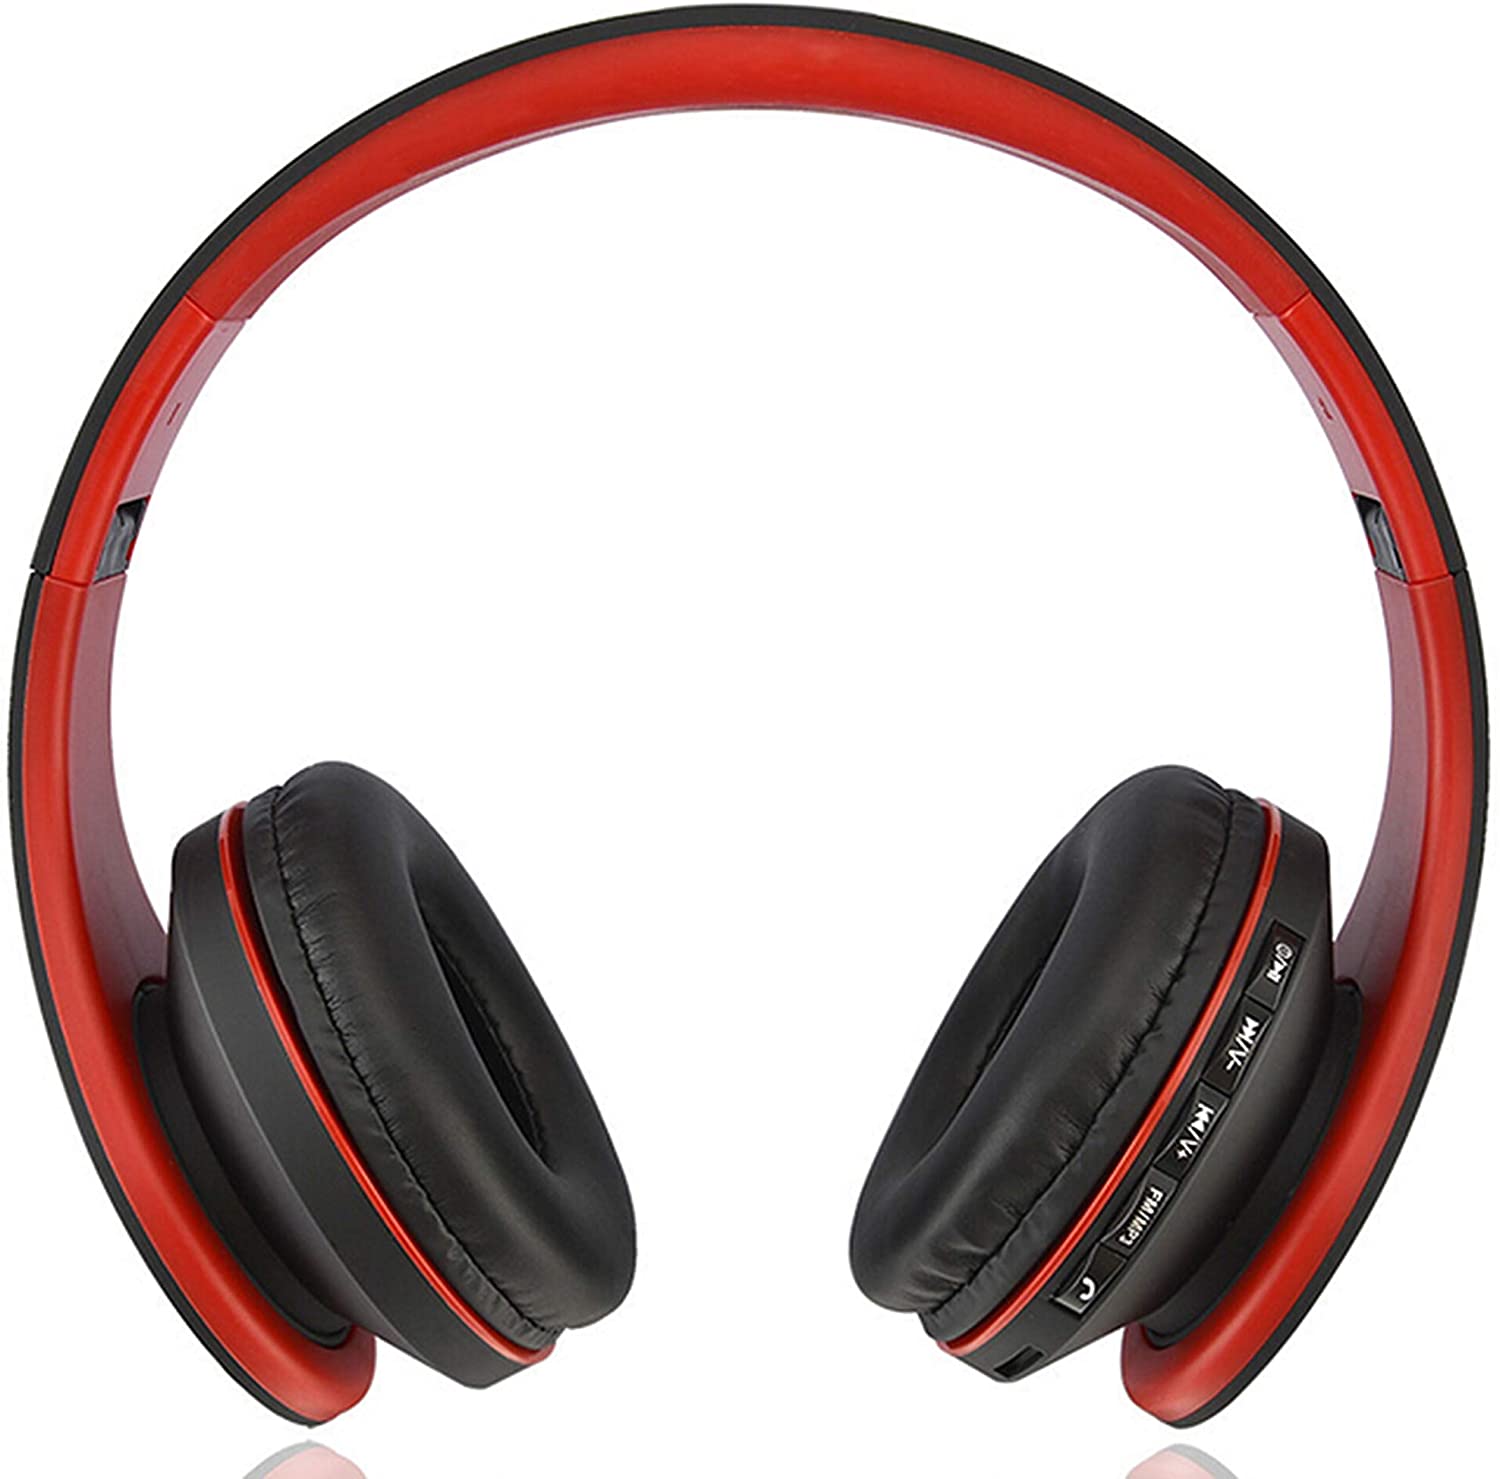 XCell Stereo Bluetooth Headset in Bahrain - Gaming Accessories